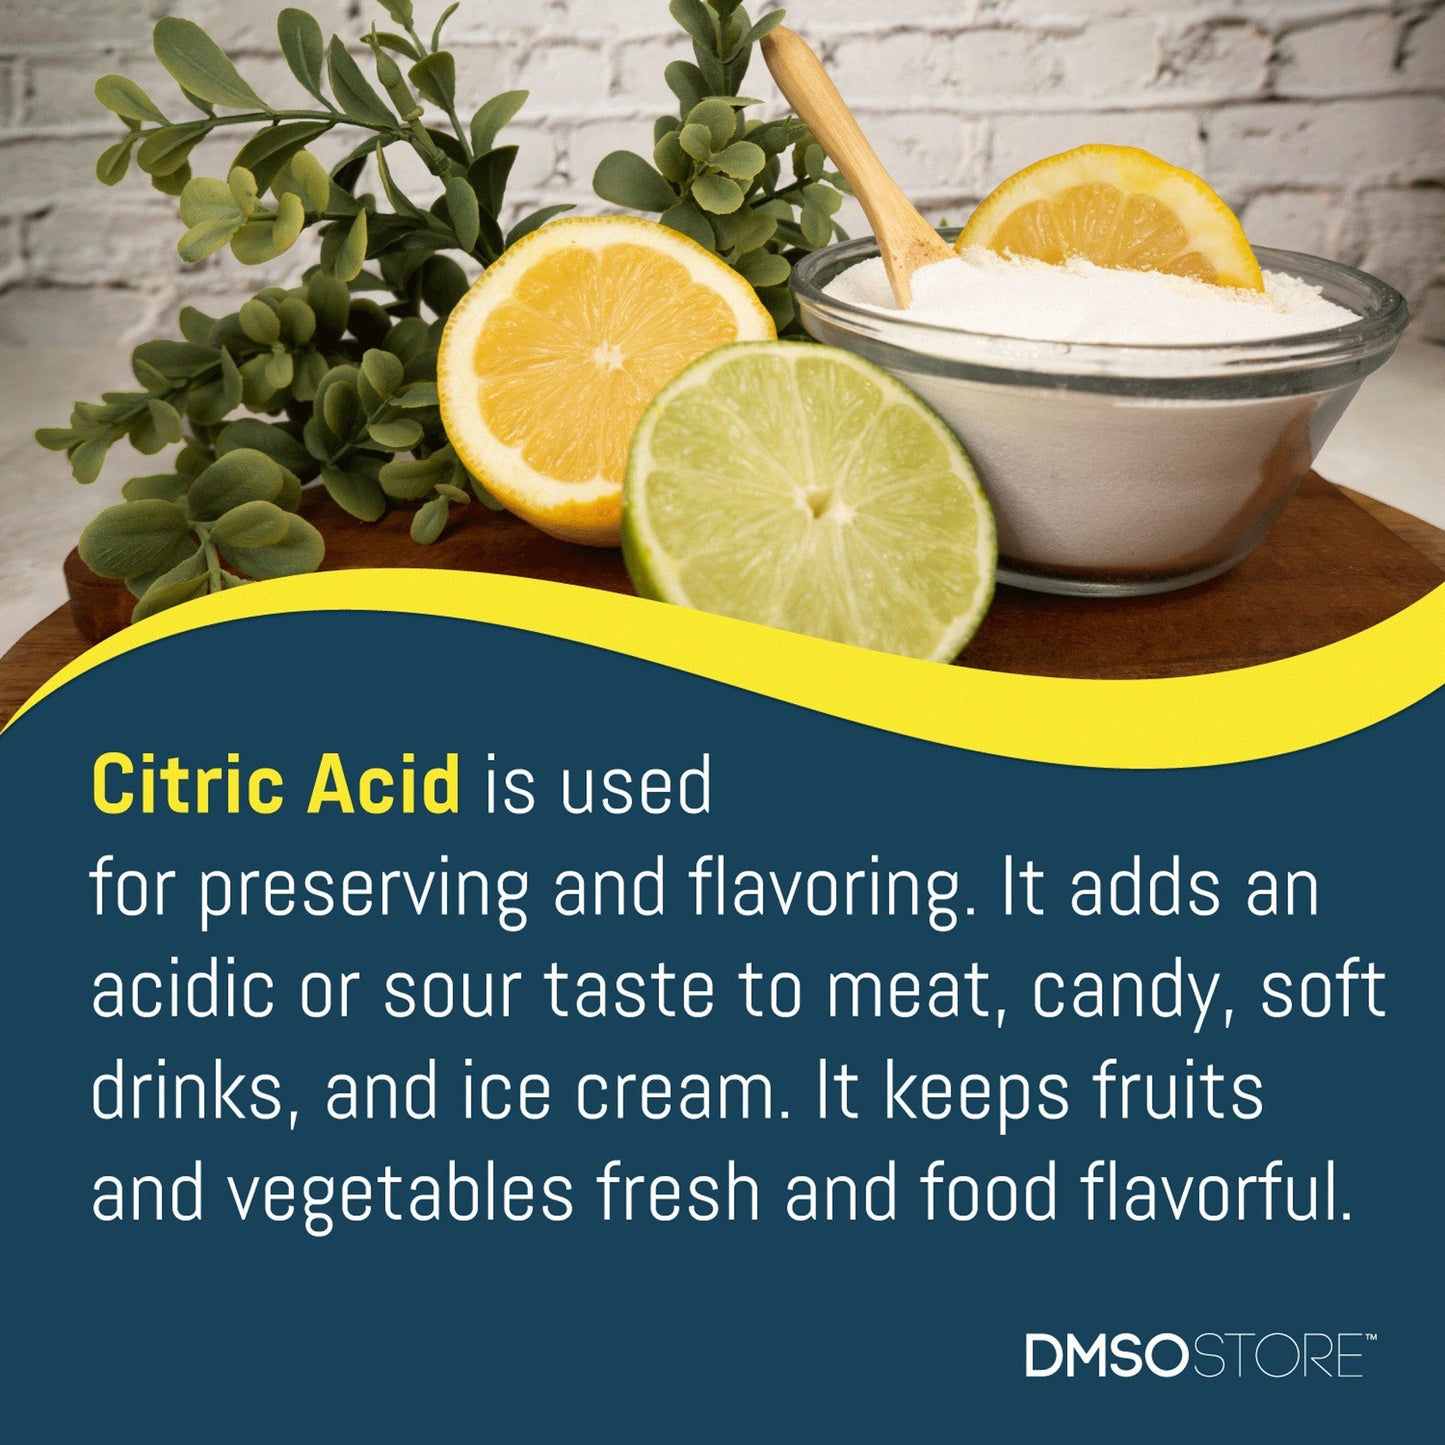 Bowl of citric acid with lemon and lime emphasizing its use in food preservation and flavoring. A DMSO Store product